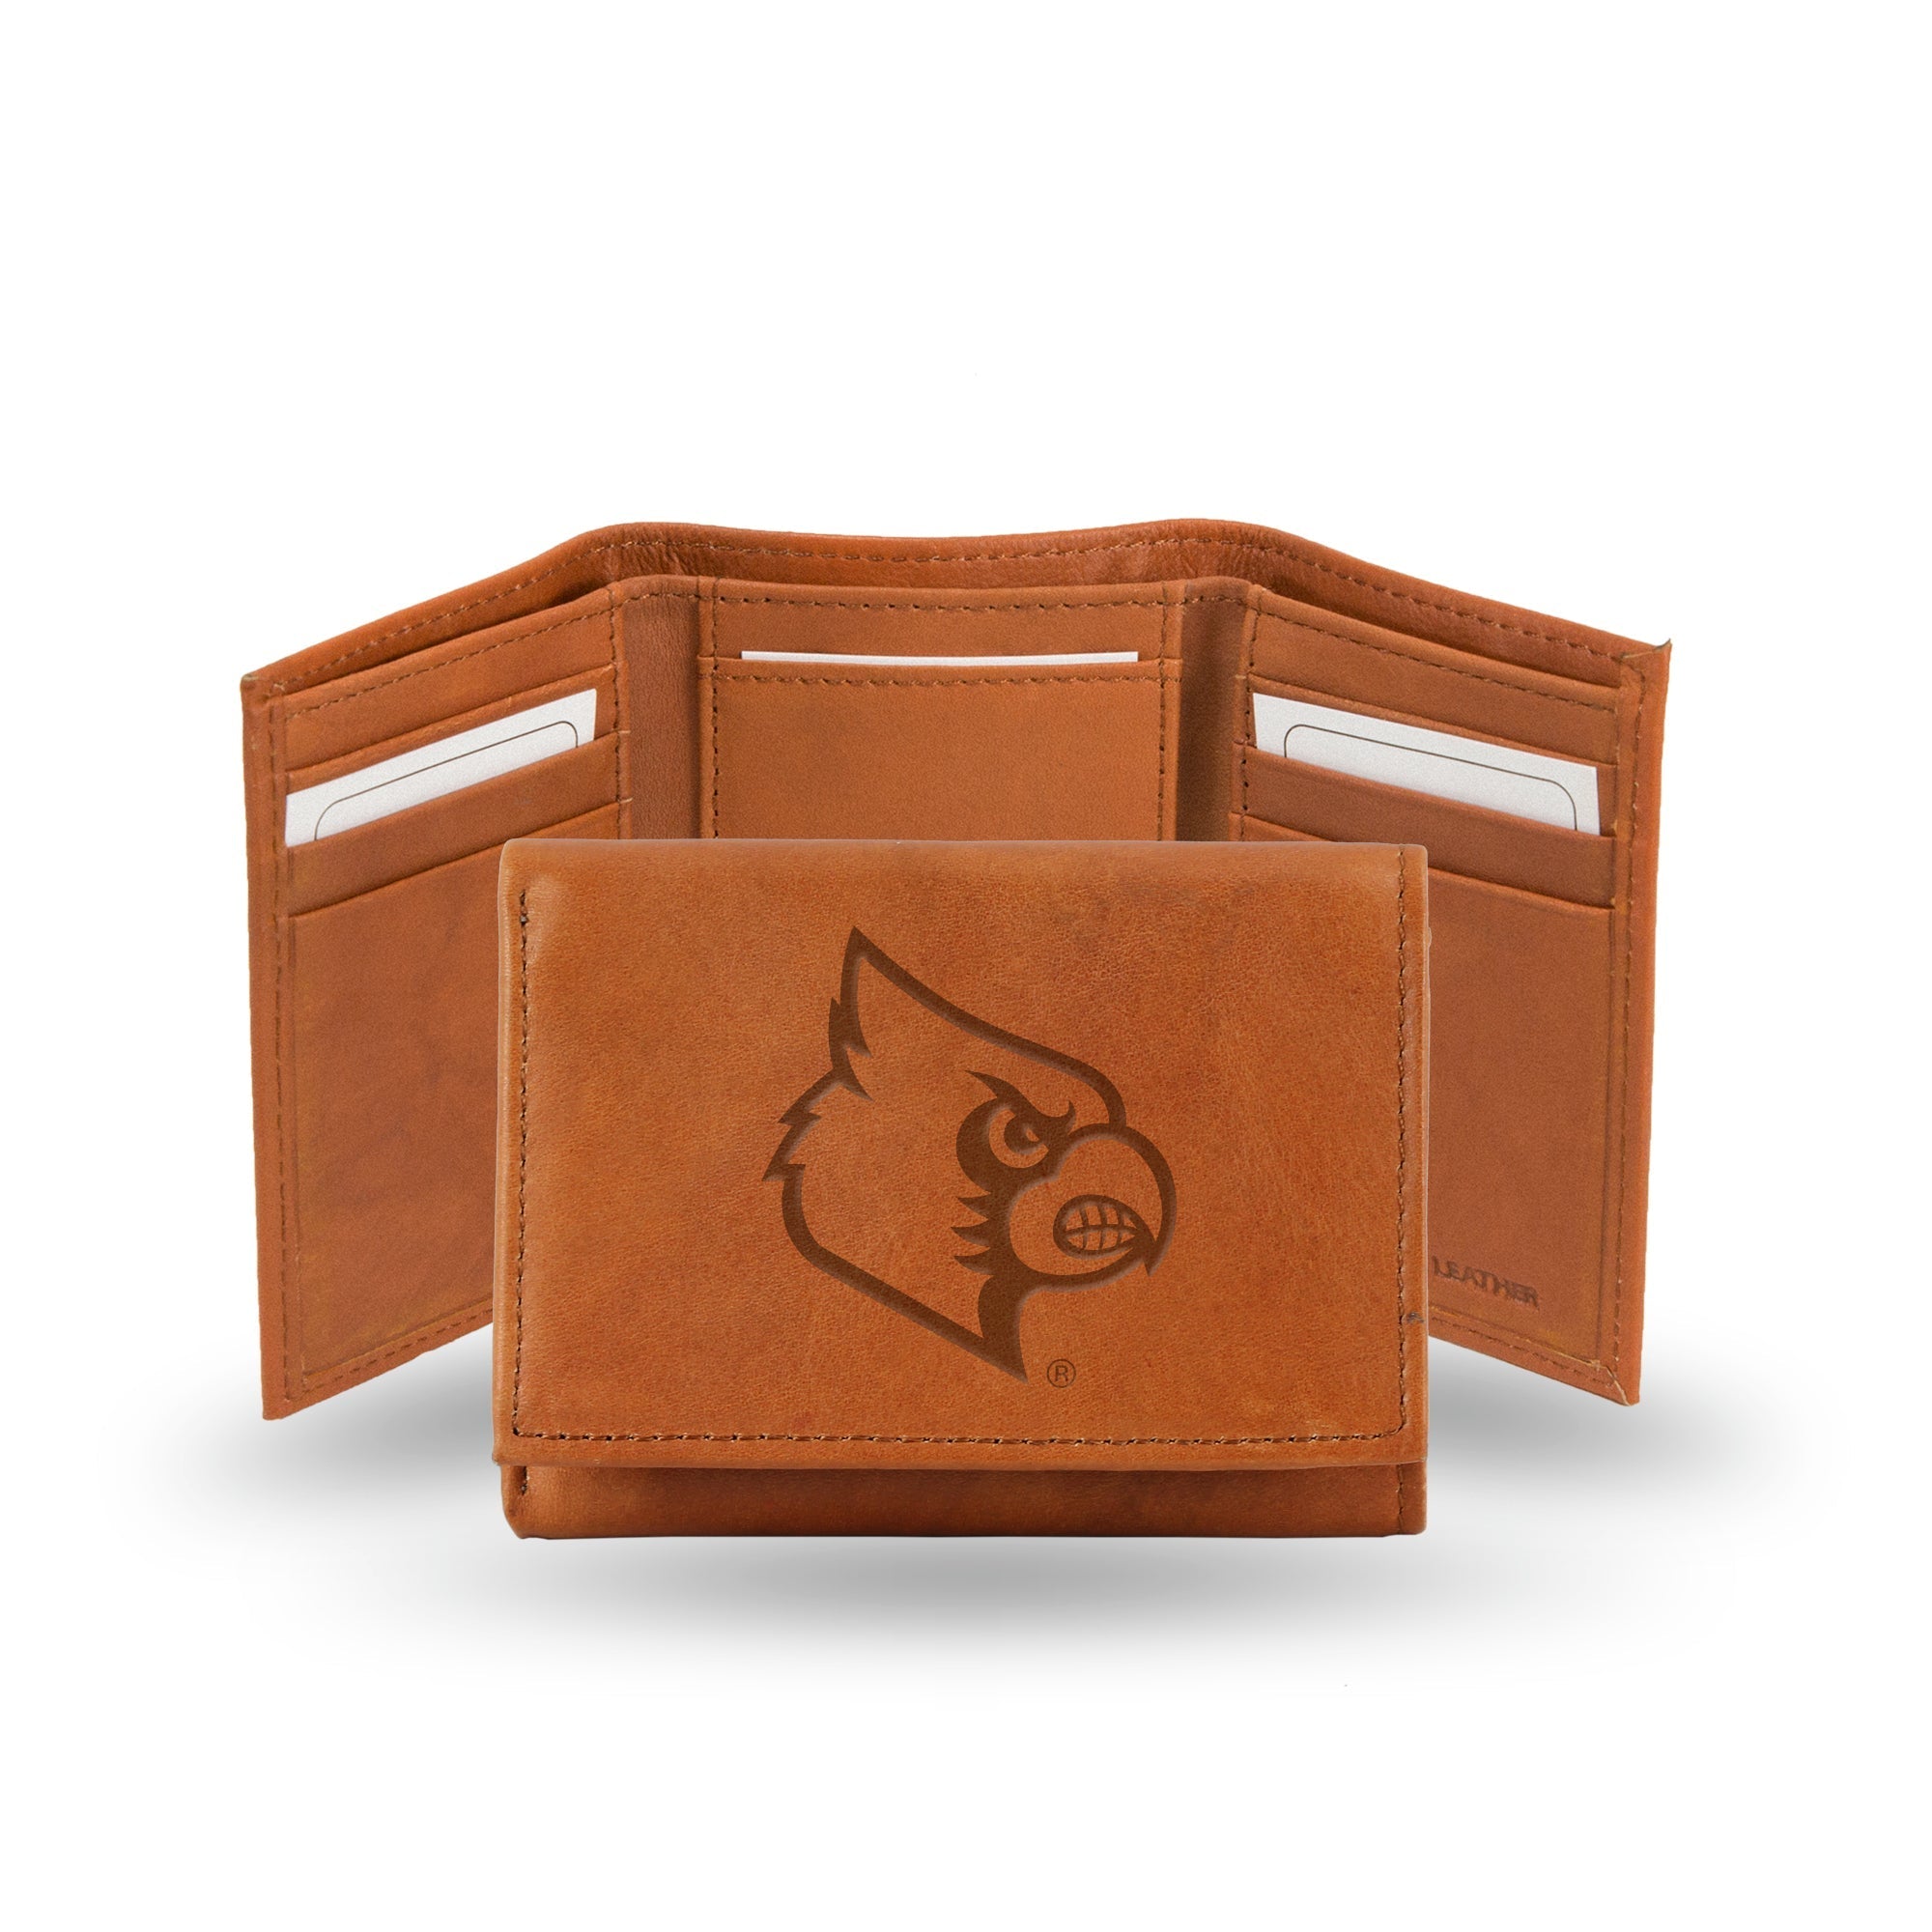 Evergreen NCAA Louisville Cardinals Brown Leather Trifold Wallet Officially  Licensed with Gift Box